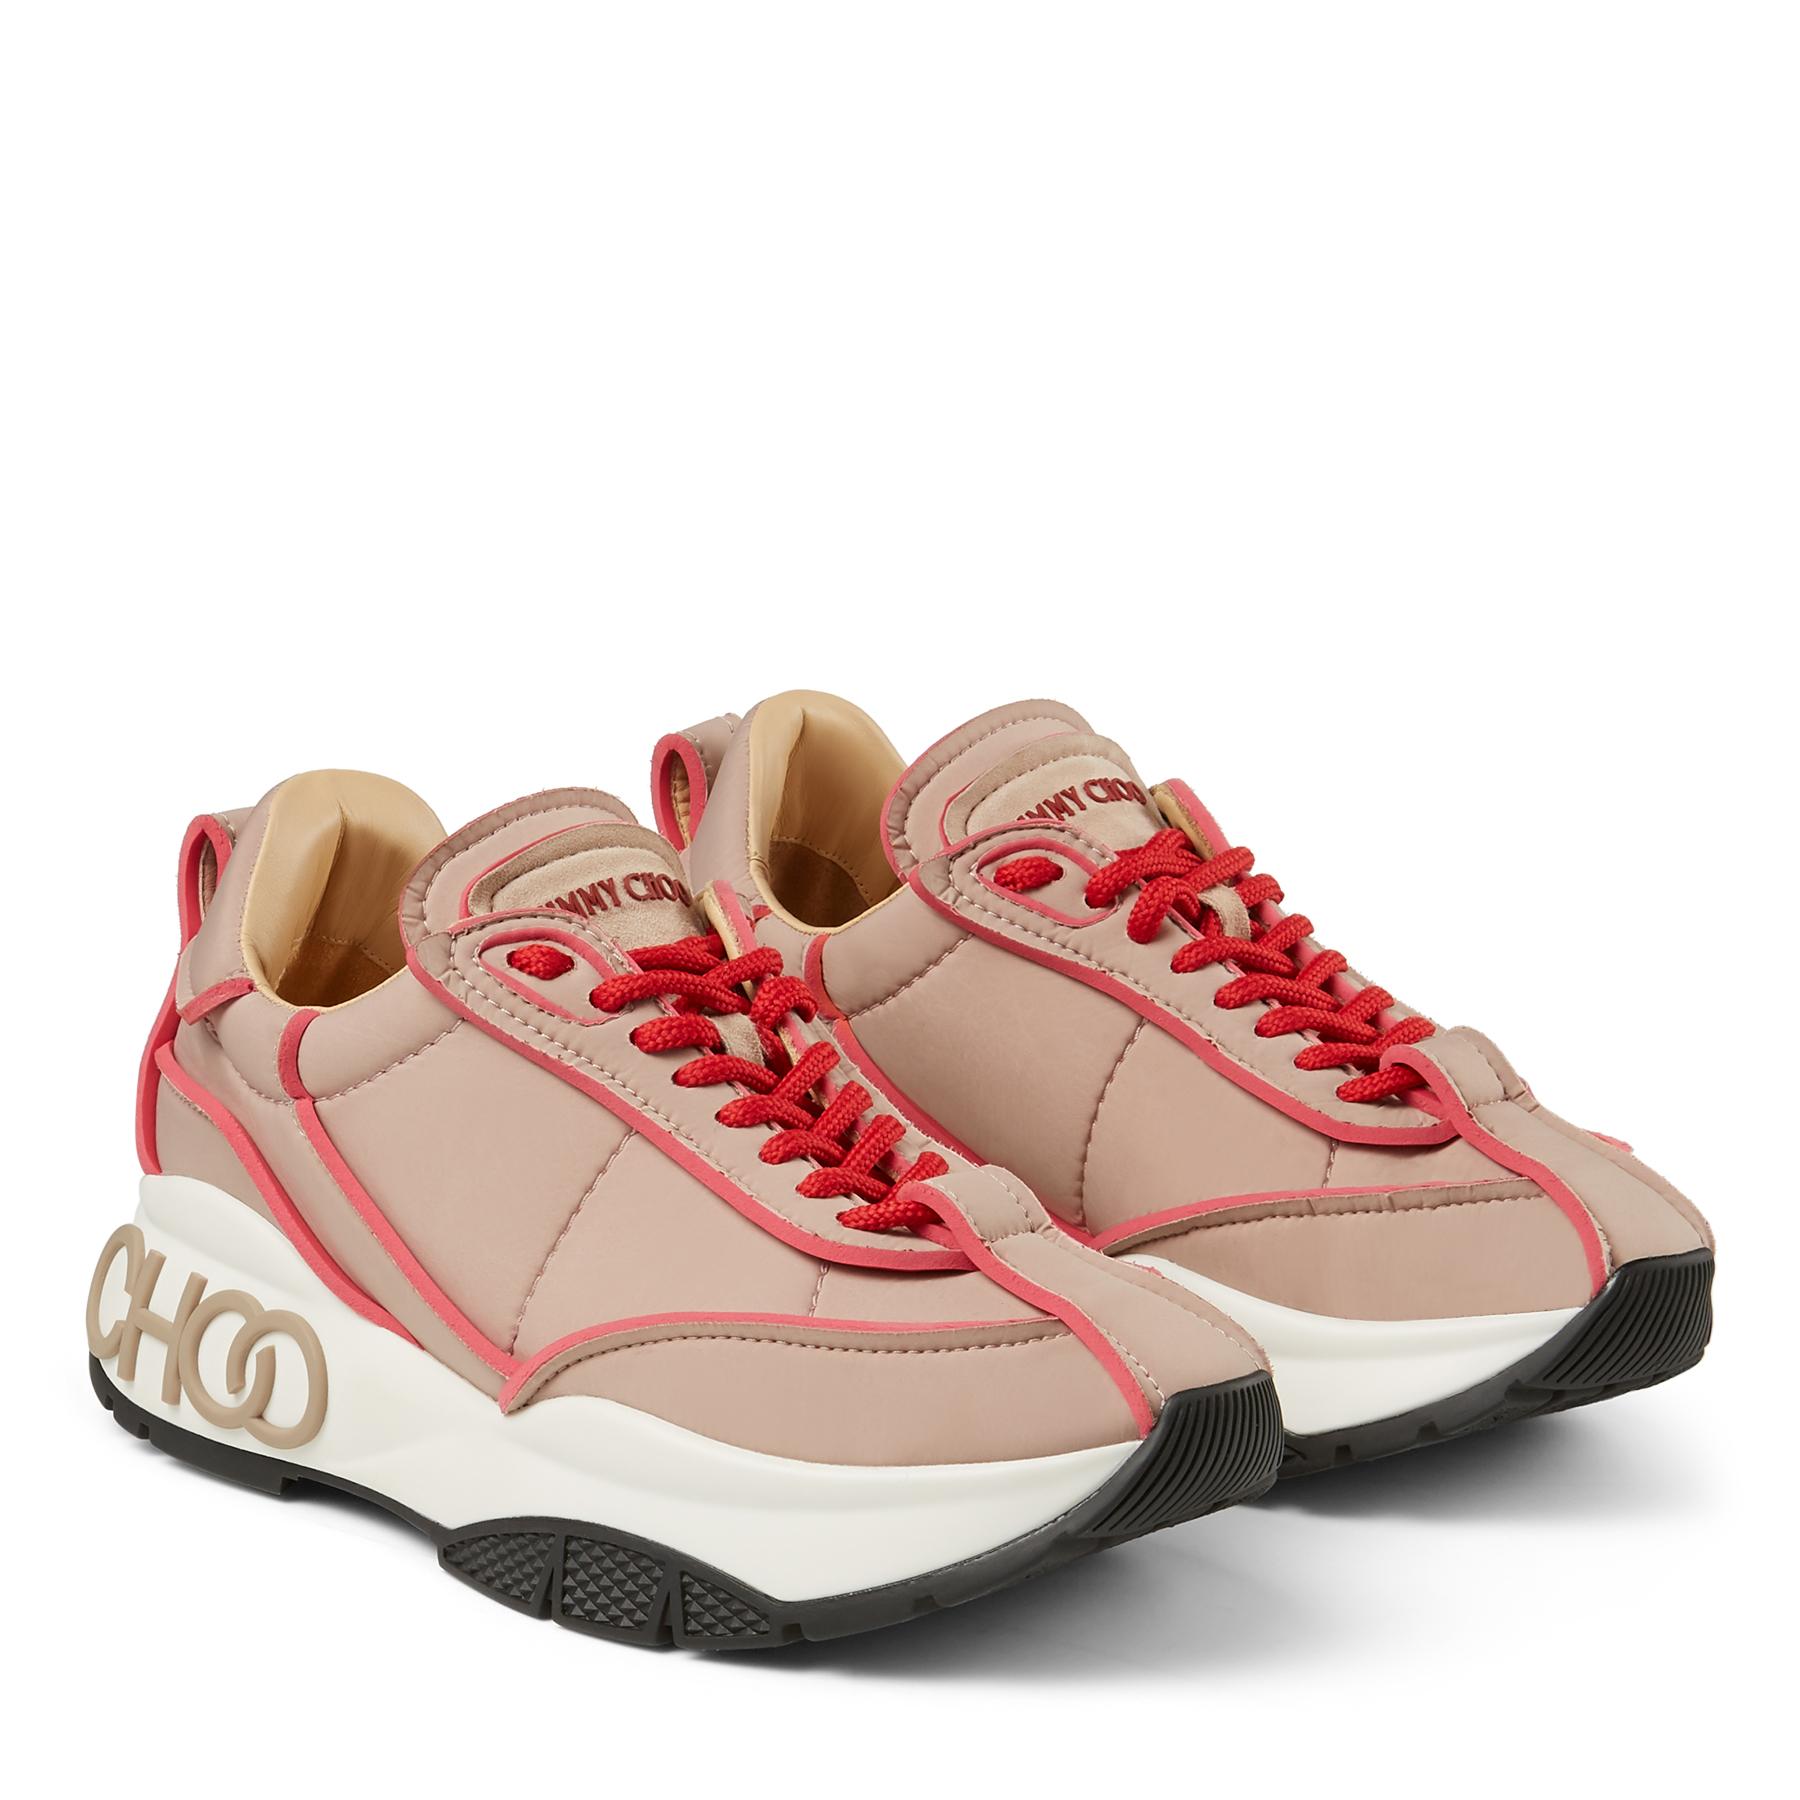 Jimmy Choo Raine Ballet Pink And Red Padded Nylon Trainers | Lyst